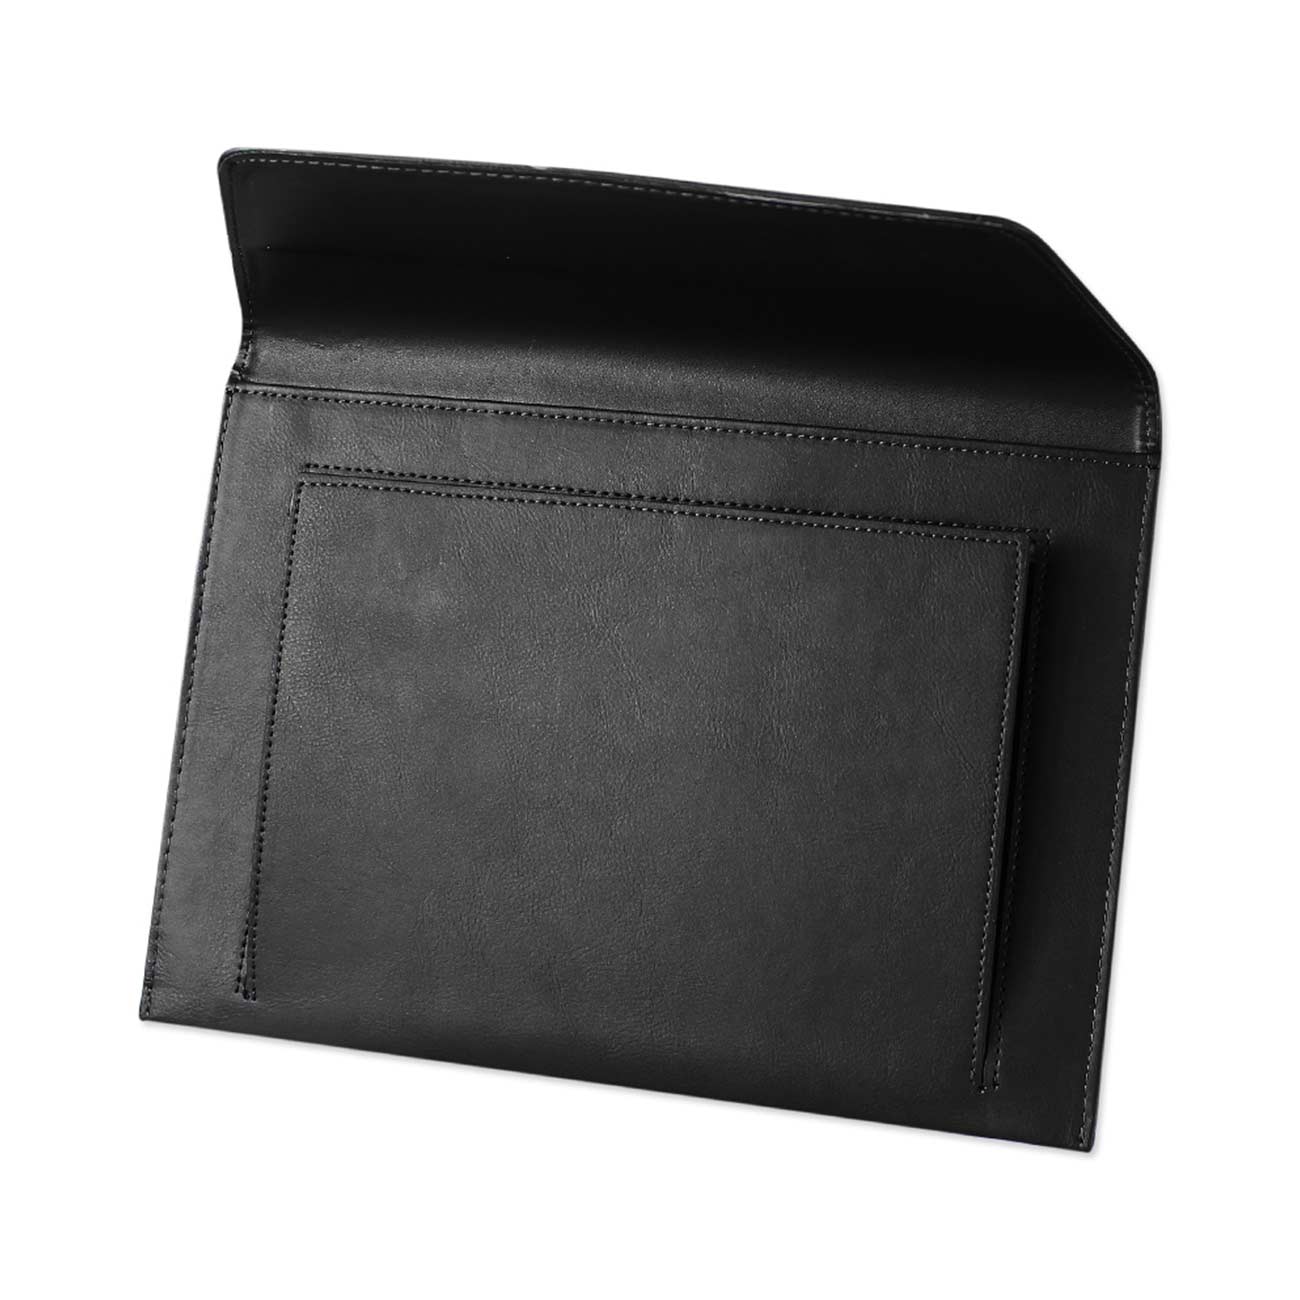 REIKO PREMIUM LEATHER CASE POUCH FOR 8.2INCHES IPADS AND TABLETS In BLACK